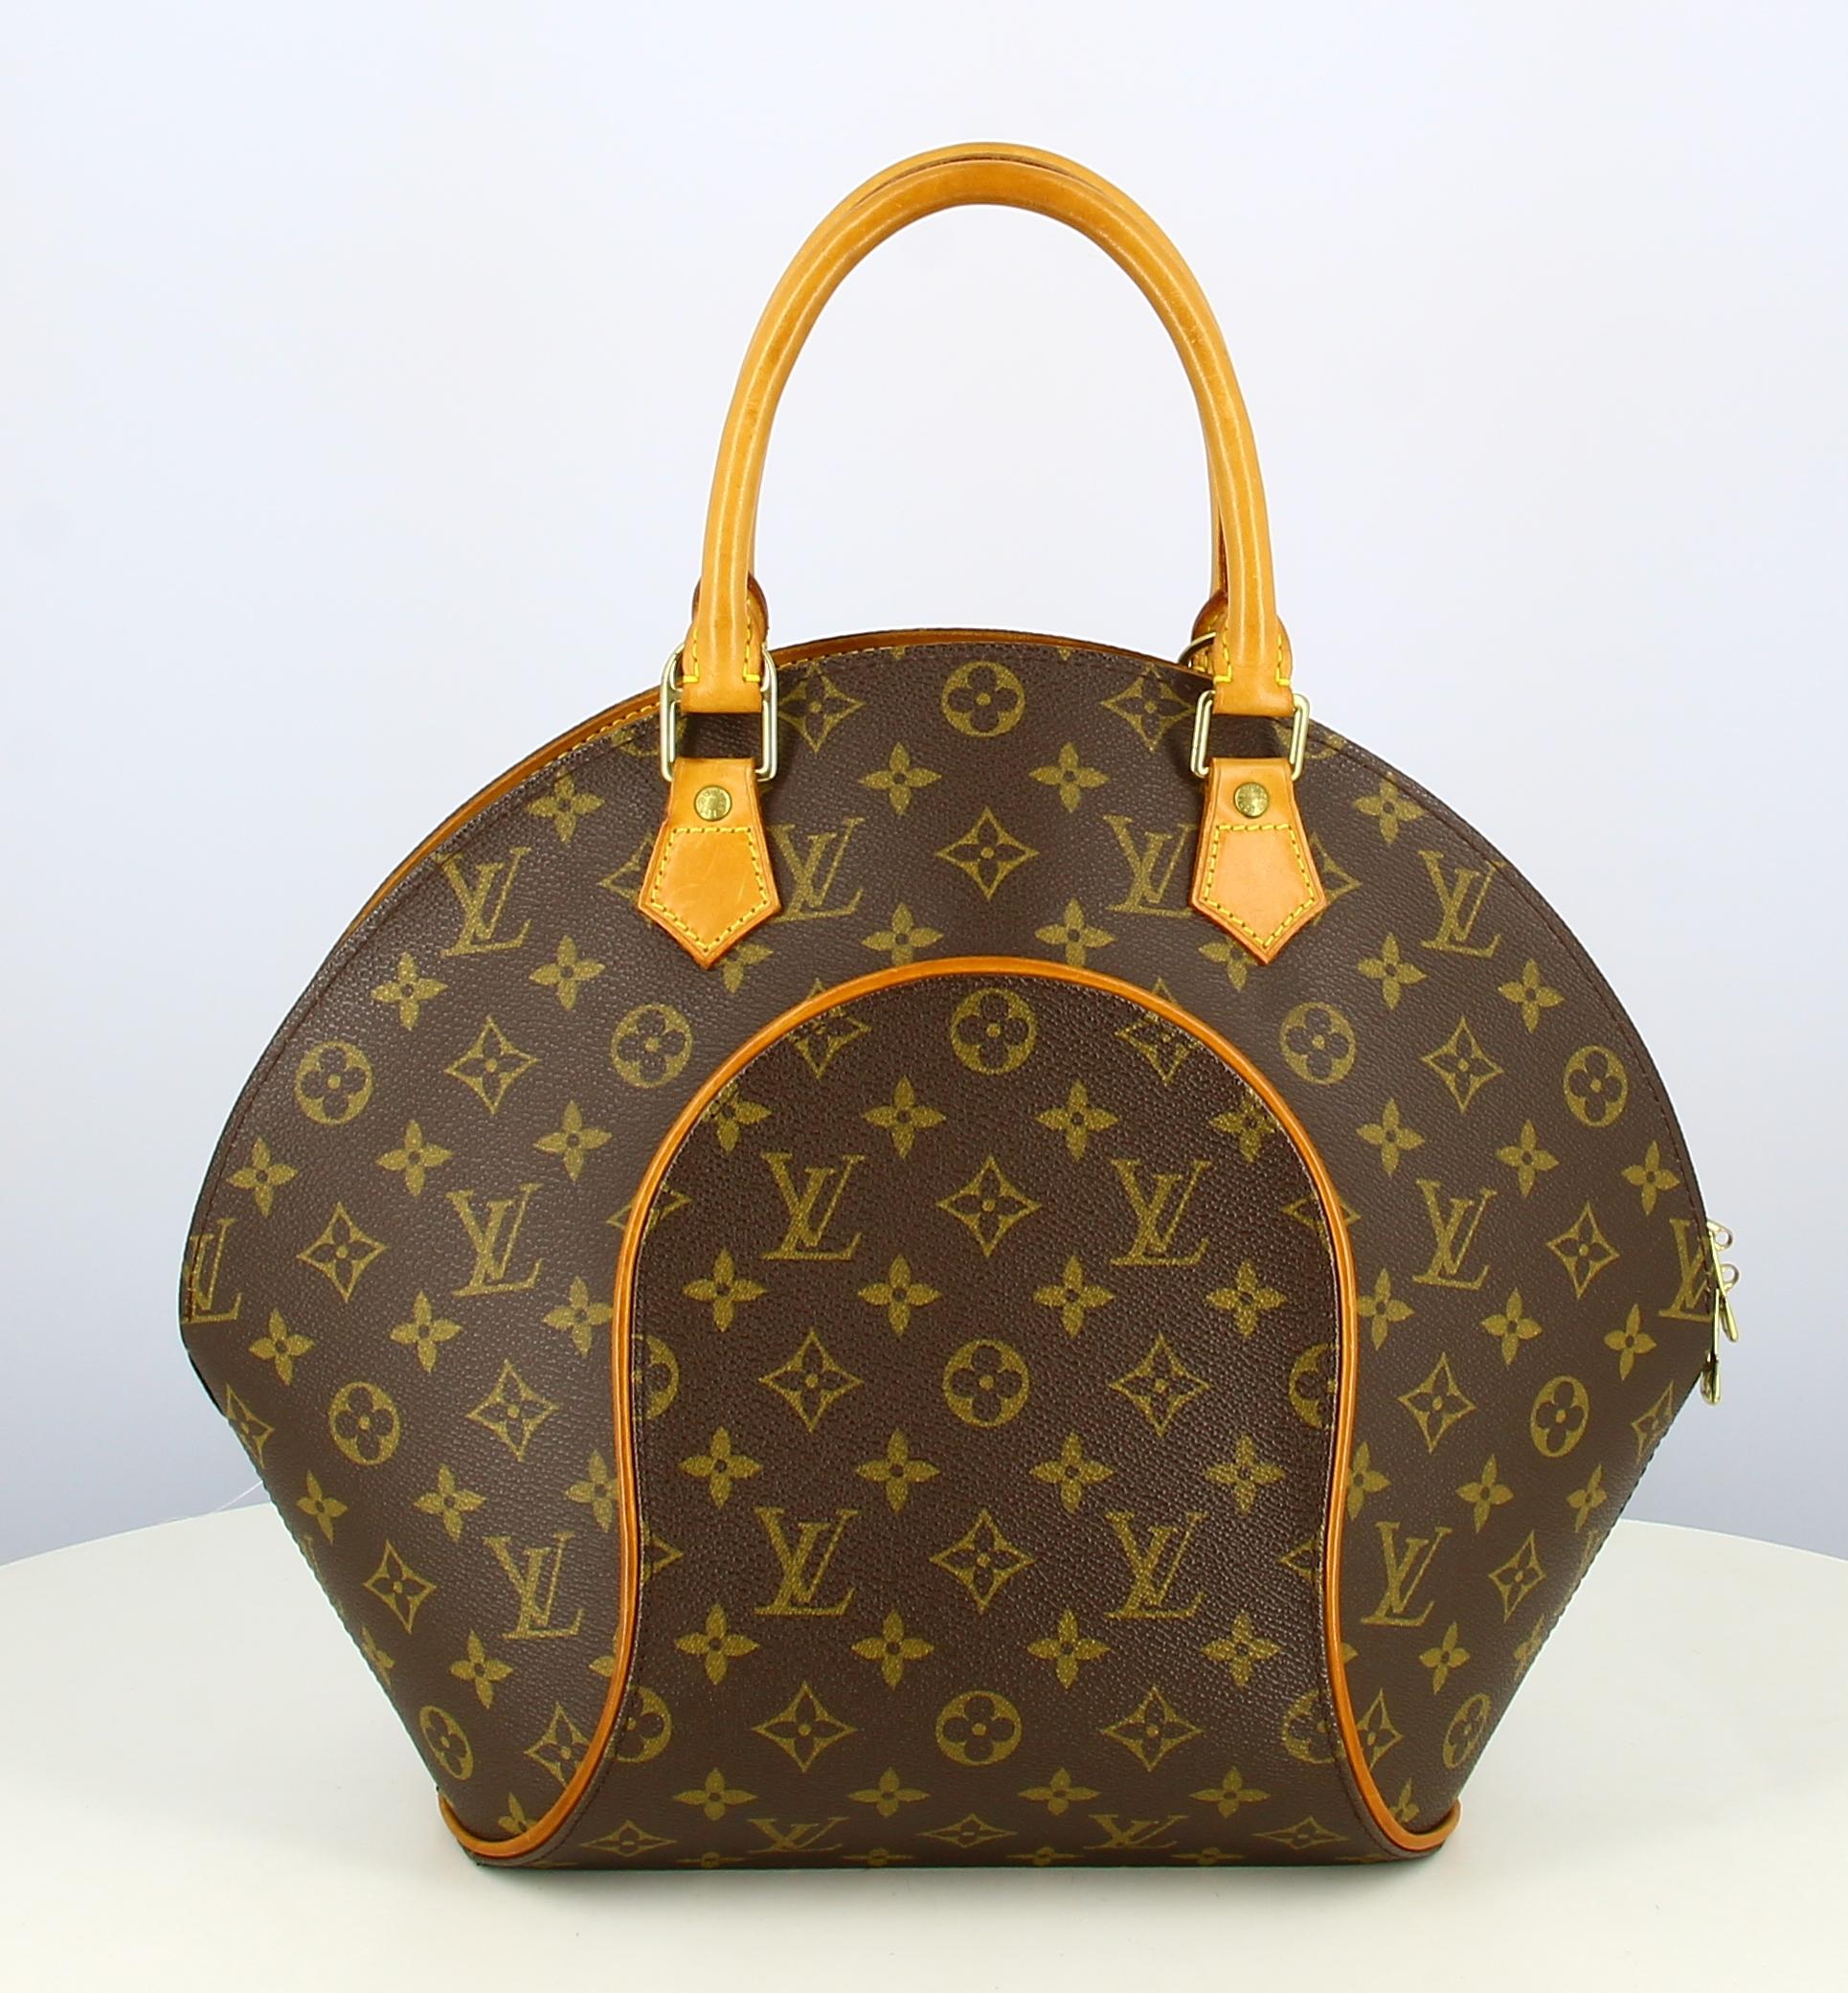 1998 Louis Vuitton Elipse Bag Monogram Canvas

- Very good condition. Shows very slight signs of wear over time. 
- Louis Vuitton Elipse Bag 
- Monogram canvas 
- Brown leather strap
- Clasp: Golden zip 
- Inside : Inside pocket